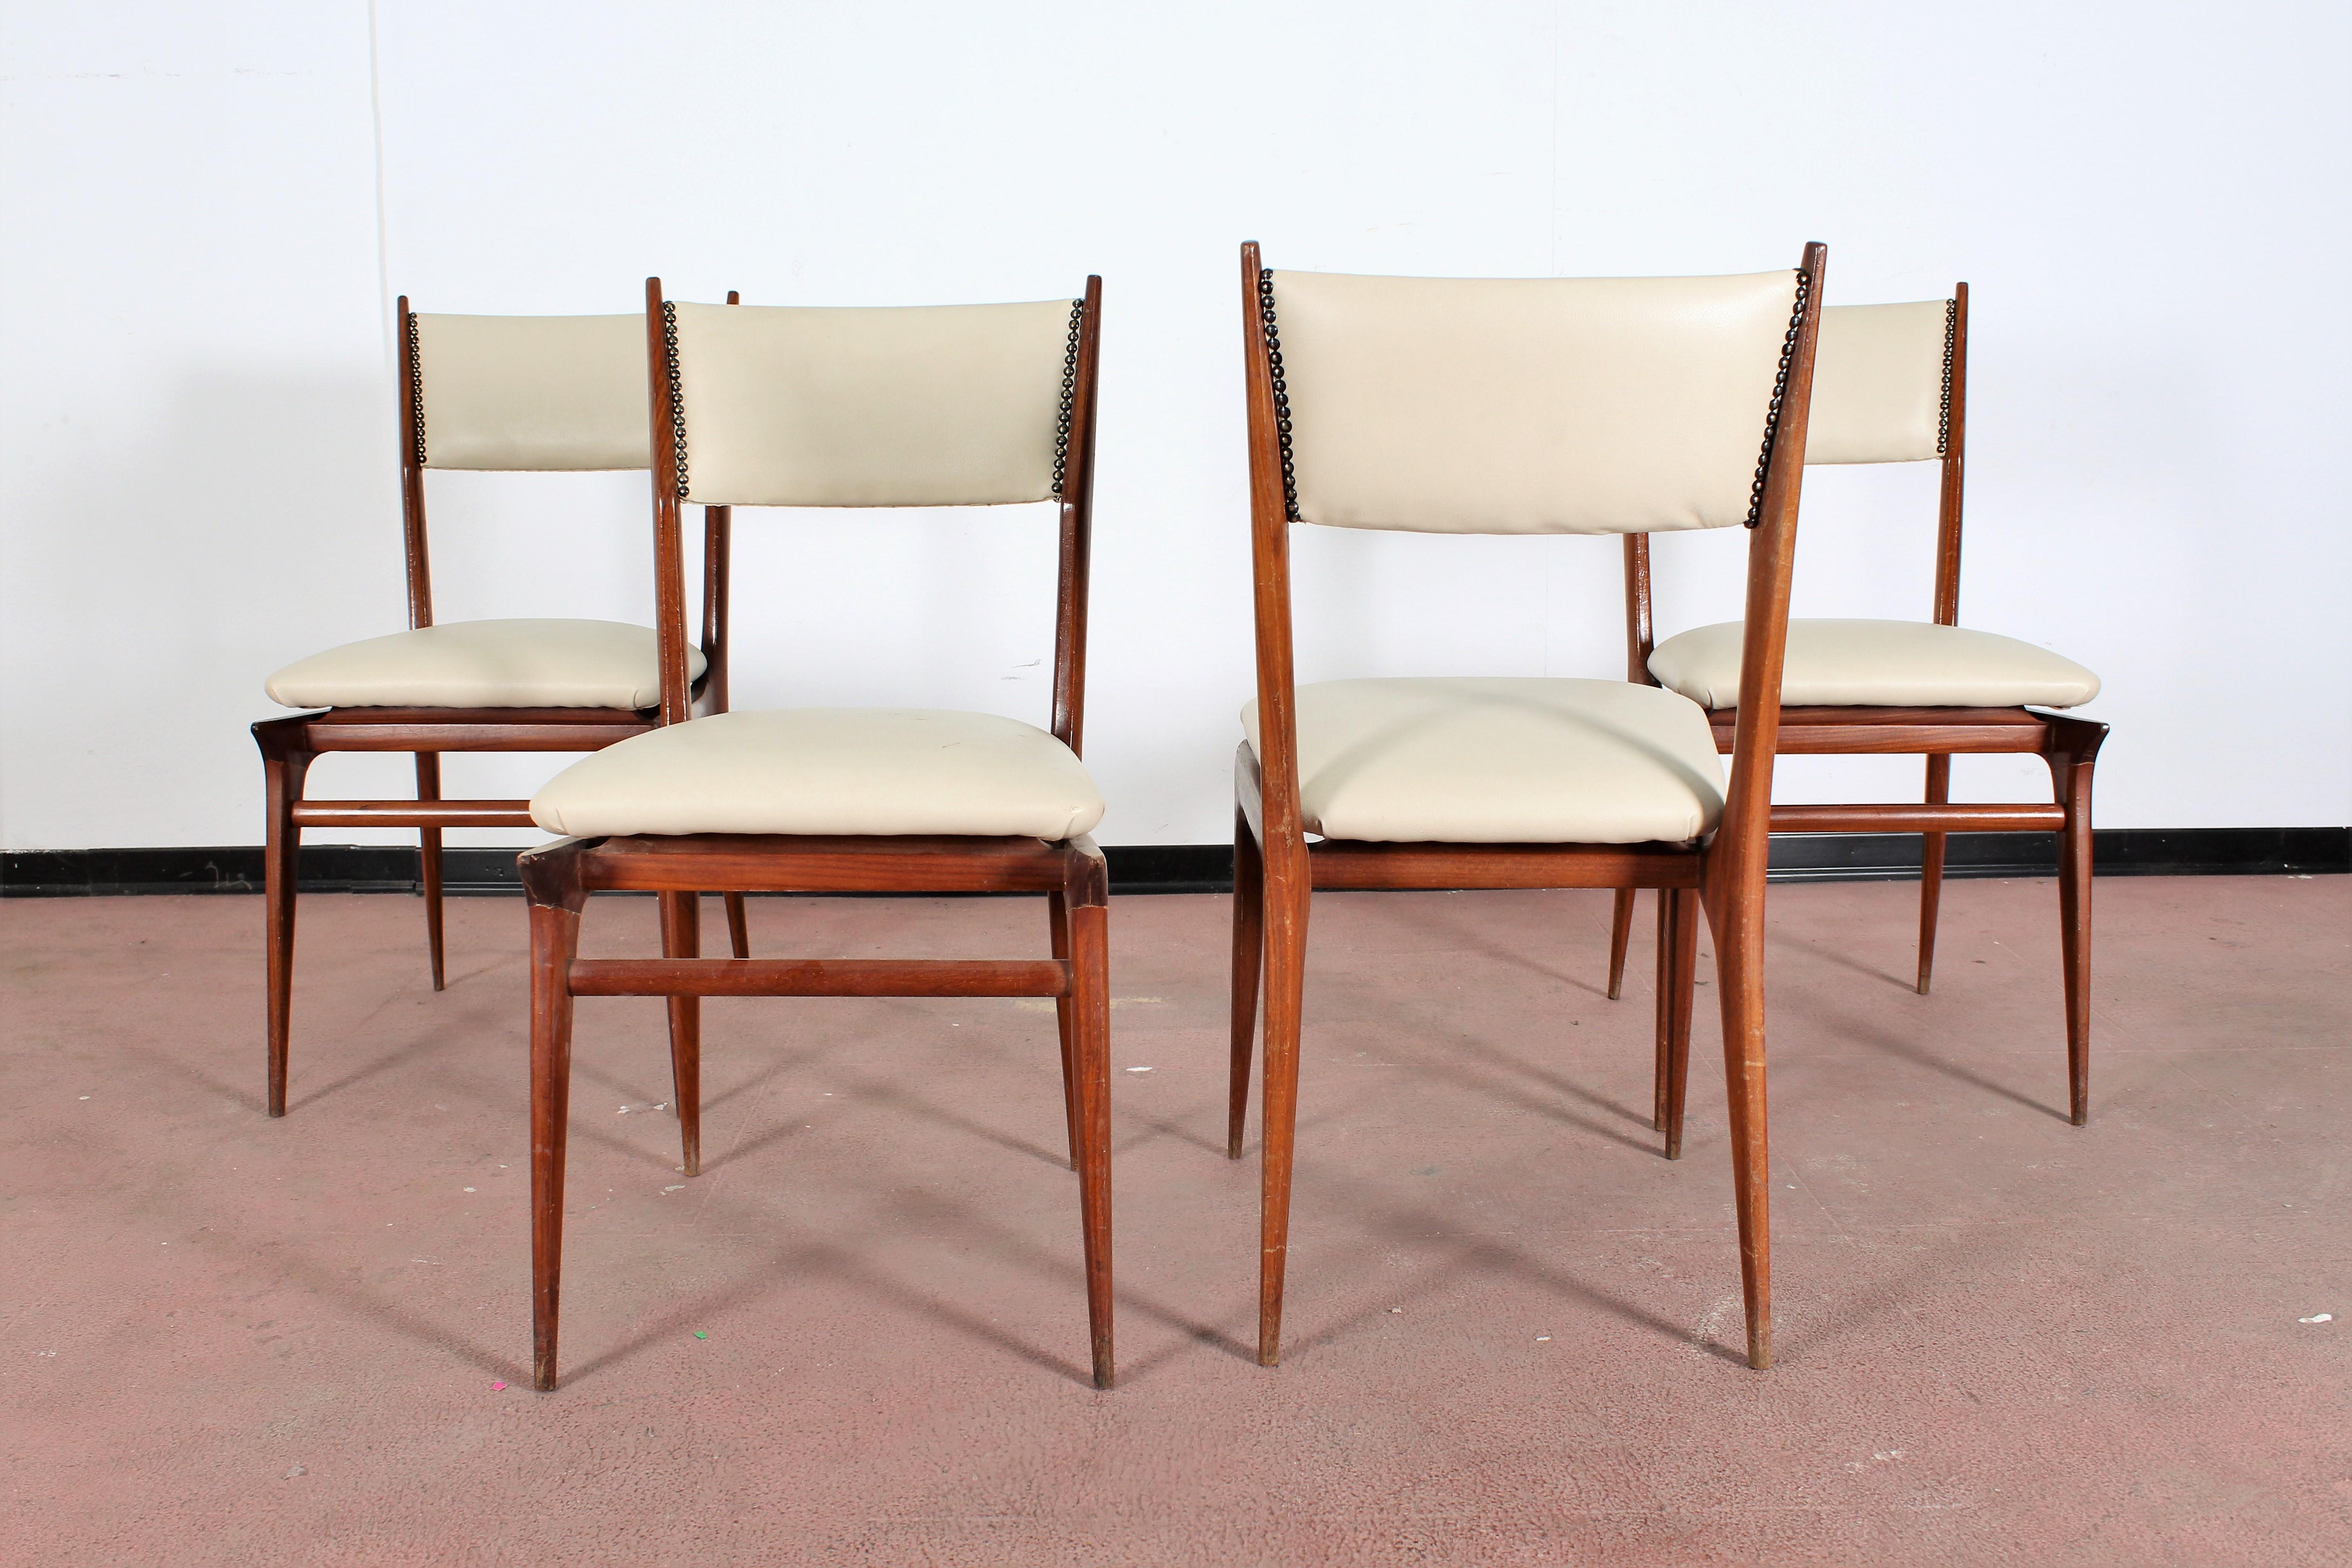 Midcentury Wood and Leatherette Chairs Carlo de Carli Italy 1950s Set of 4 1